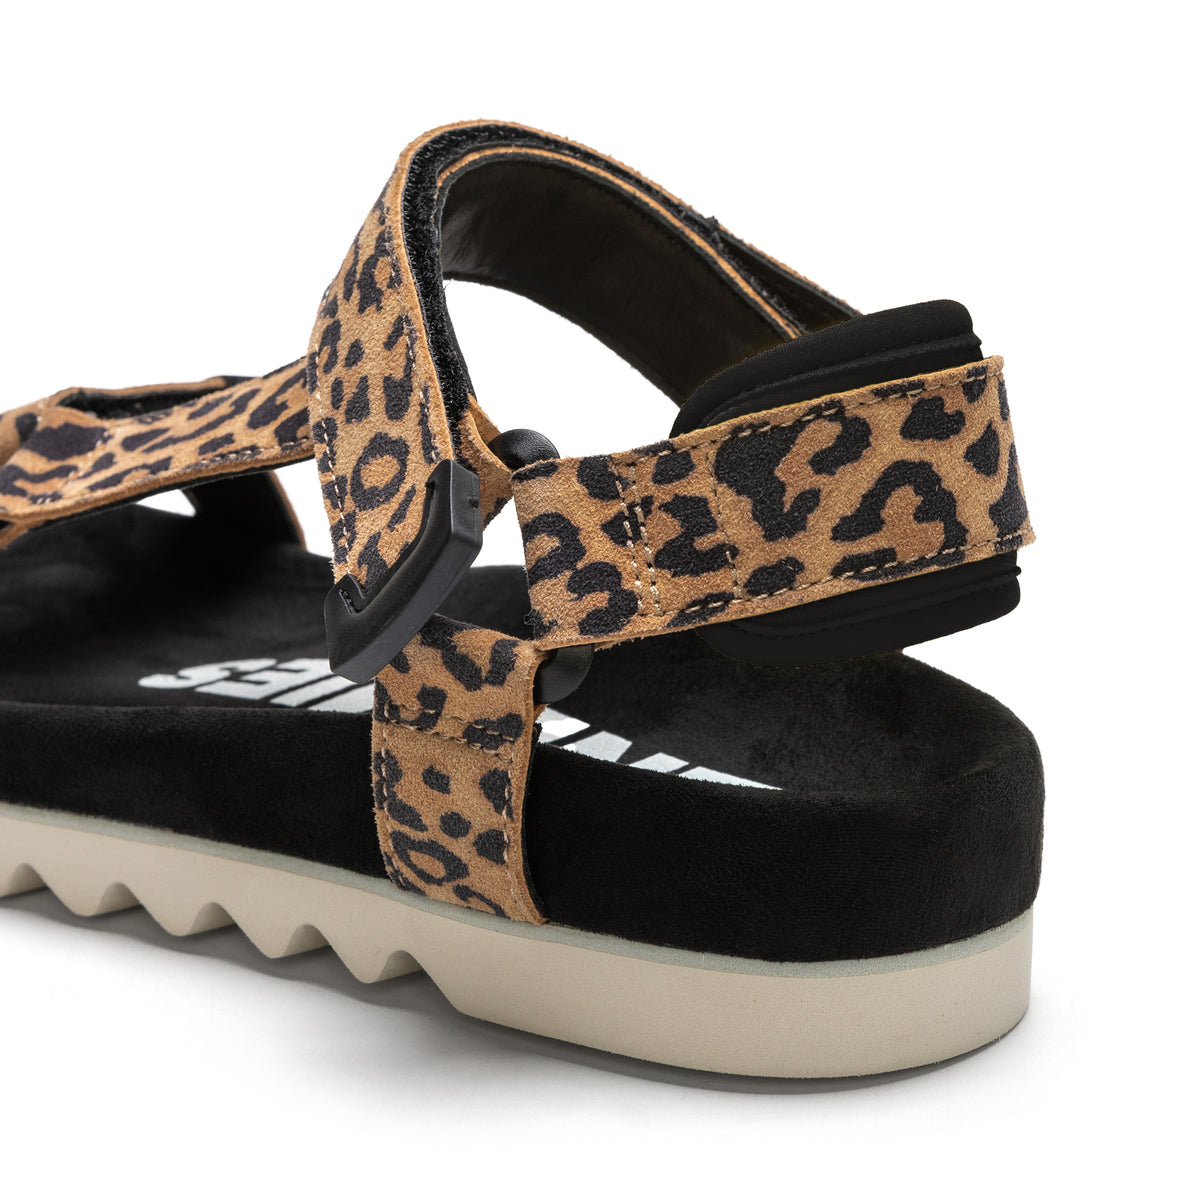 Sandal Tooth Wedge Leopard